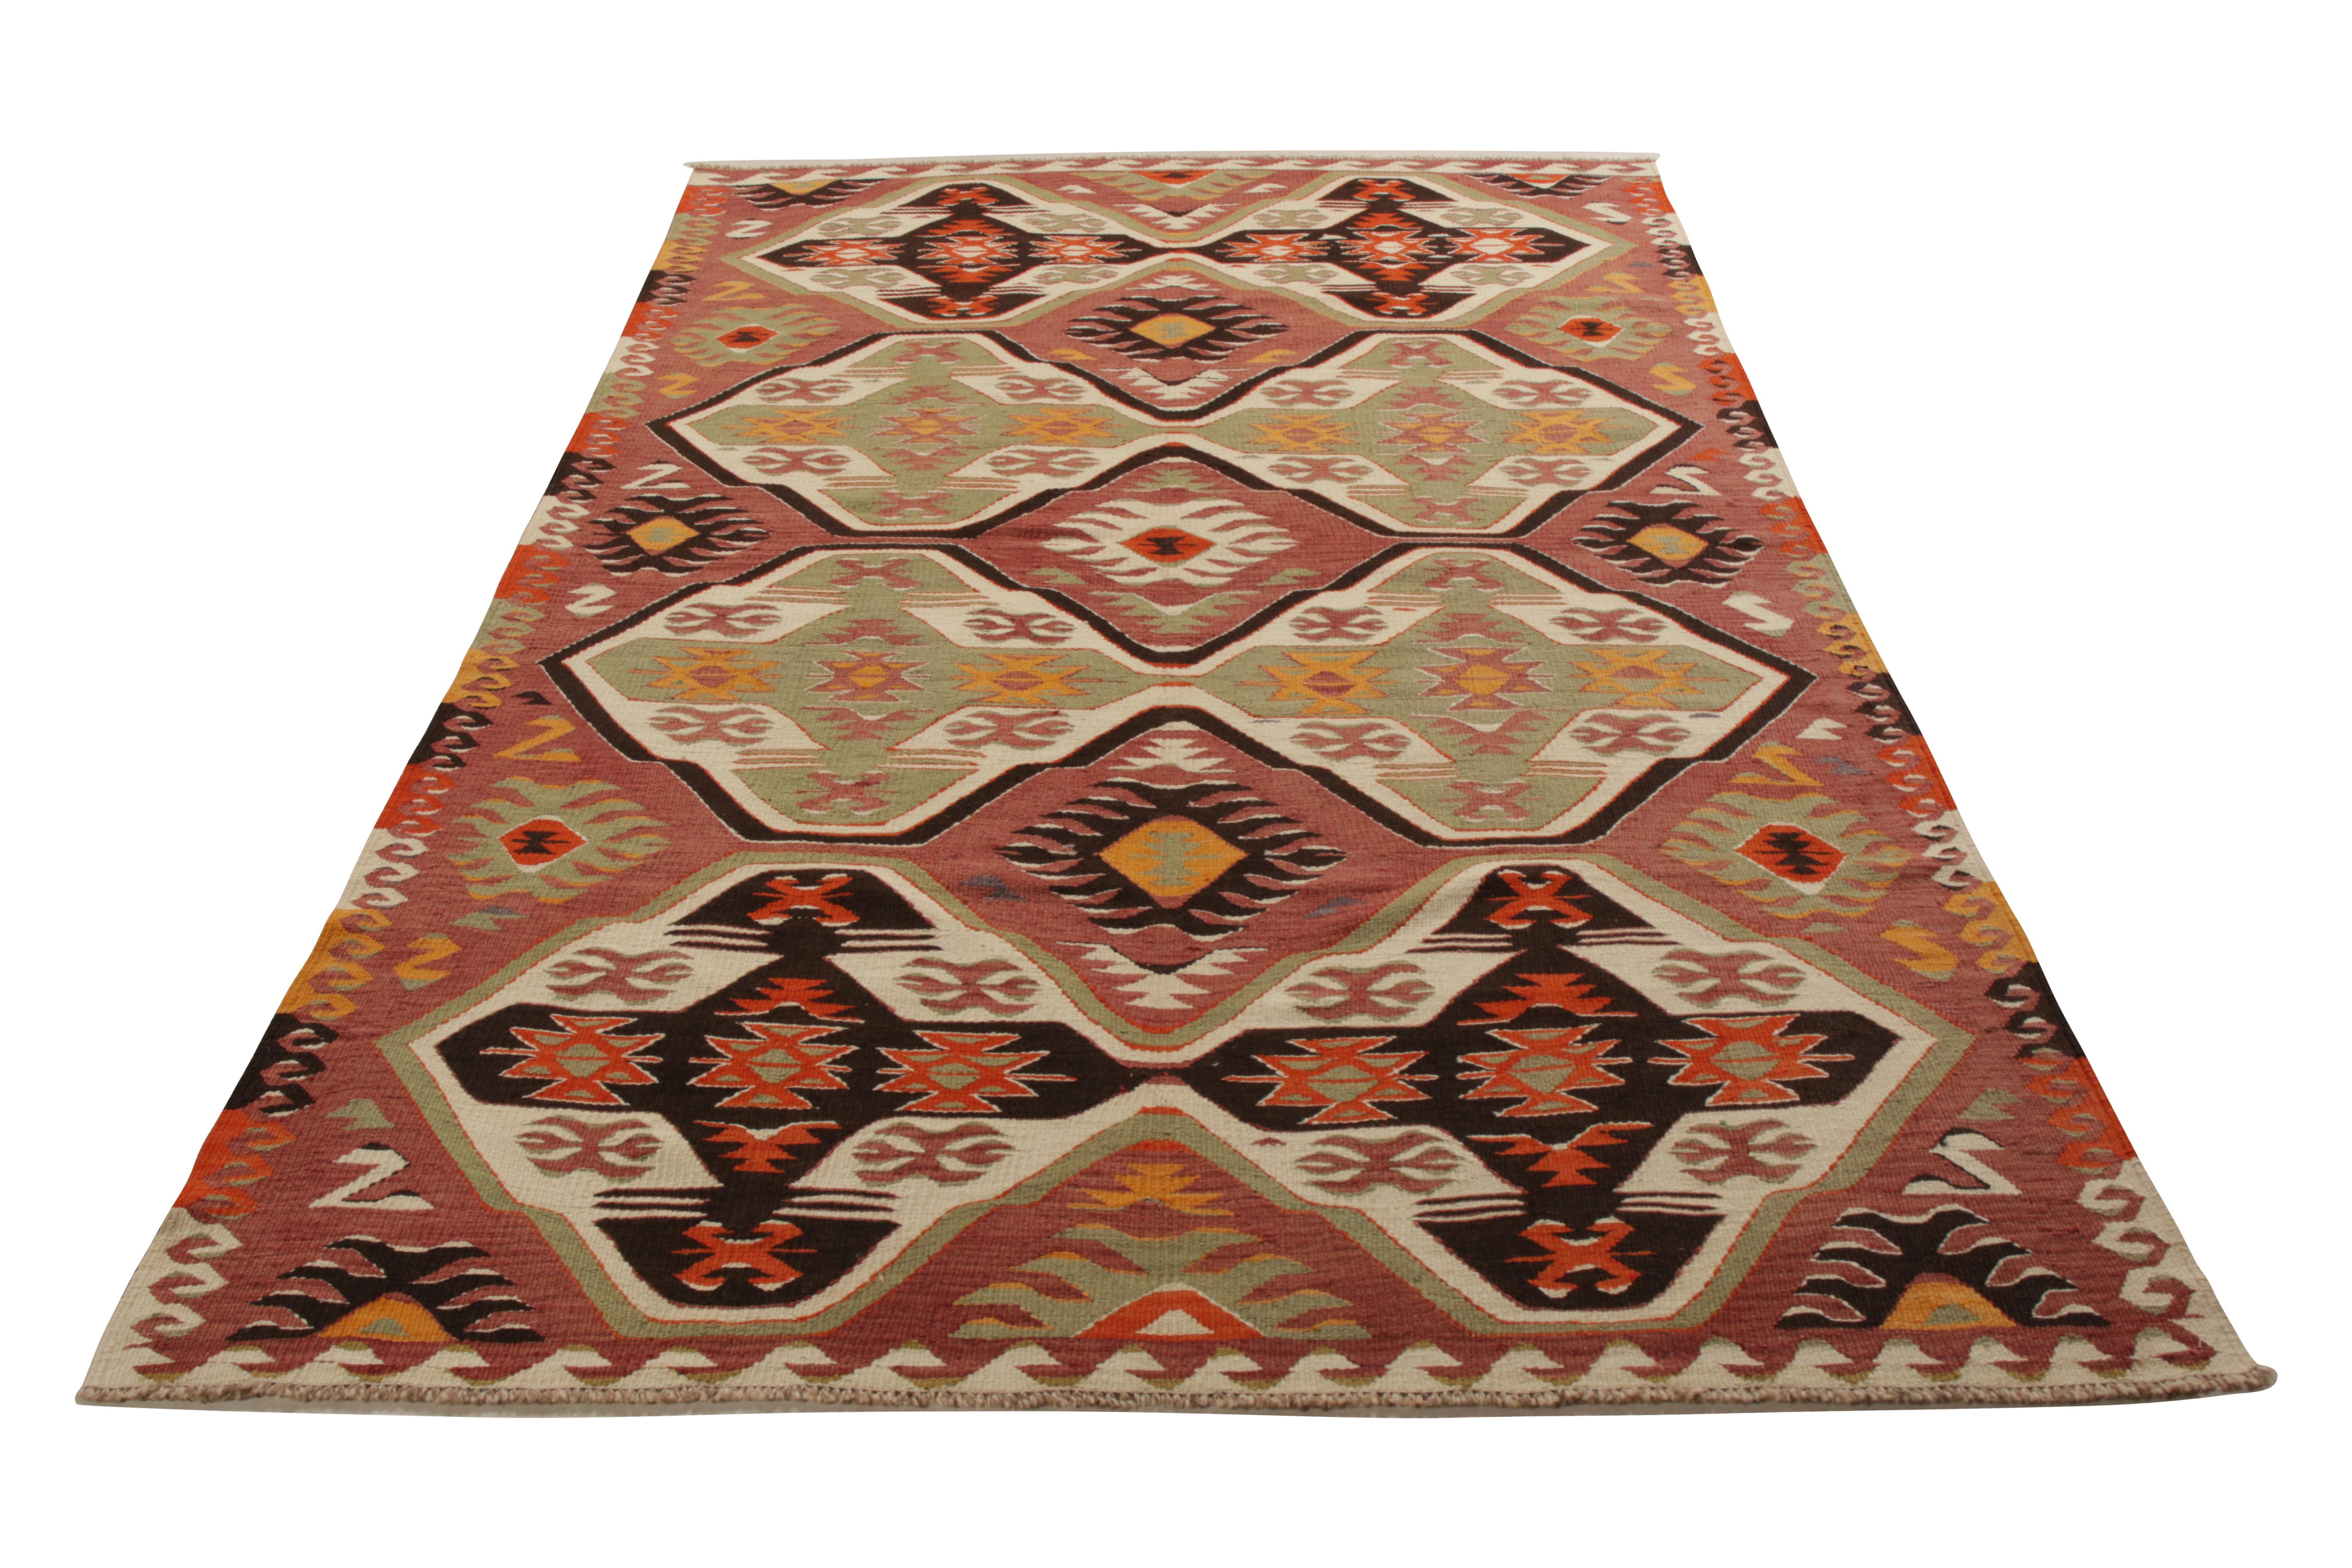 A 6x9 vintage Kilim rug, hand woven in wool originating from Turkey circa 1950-1960. Enjoying a unique near-black accent to red-pink and green hues complementing the all over geometric pattern. Idyllic in symmetry, exemplative of the midcentury